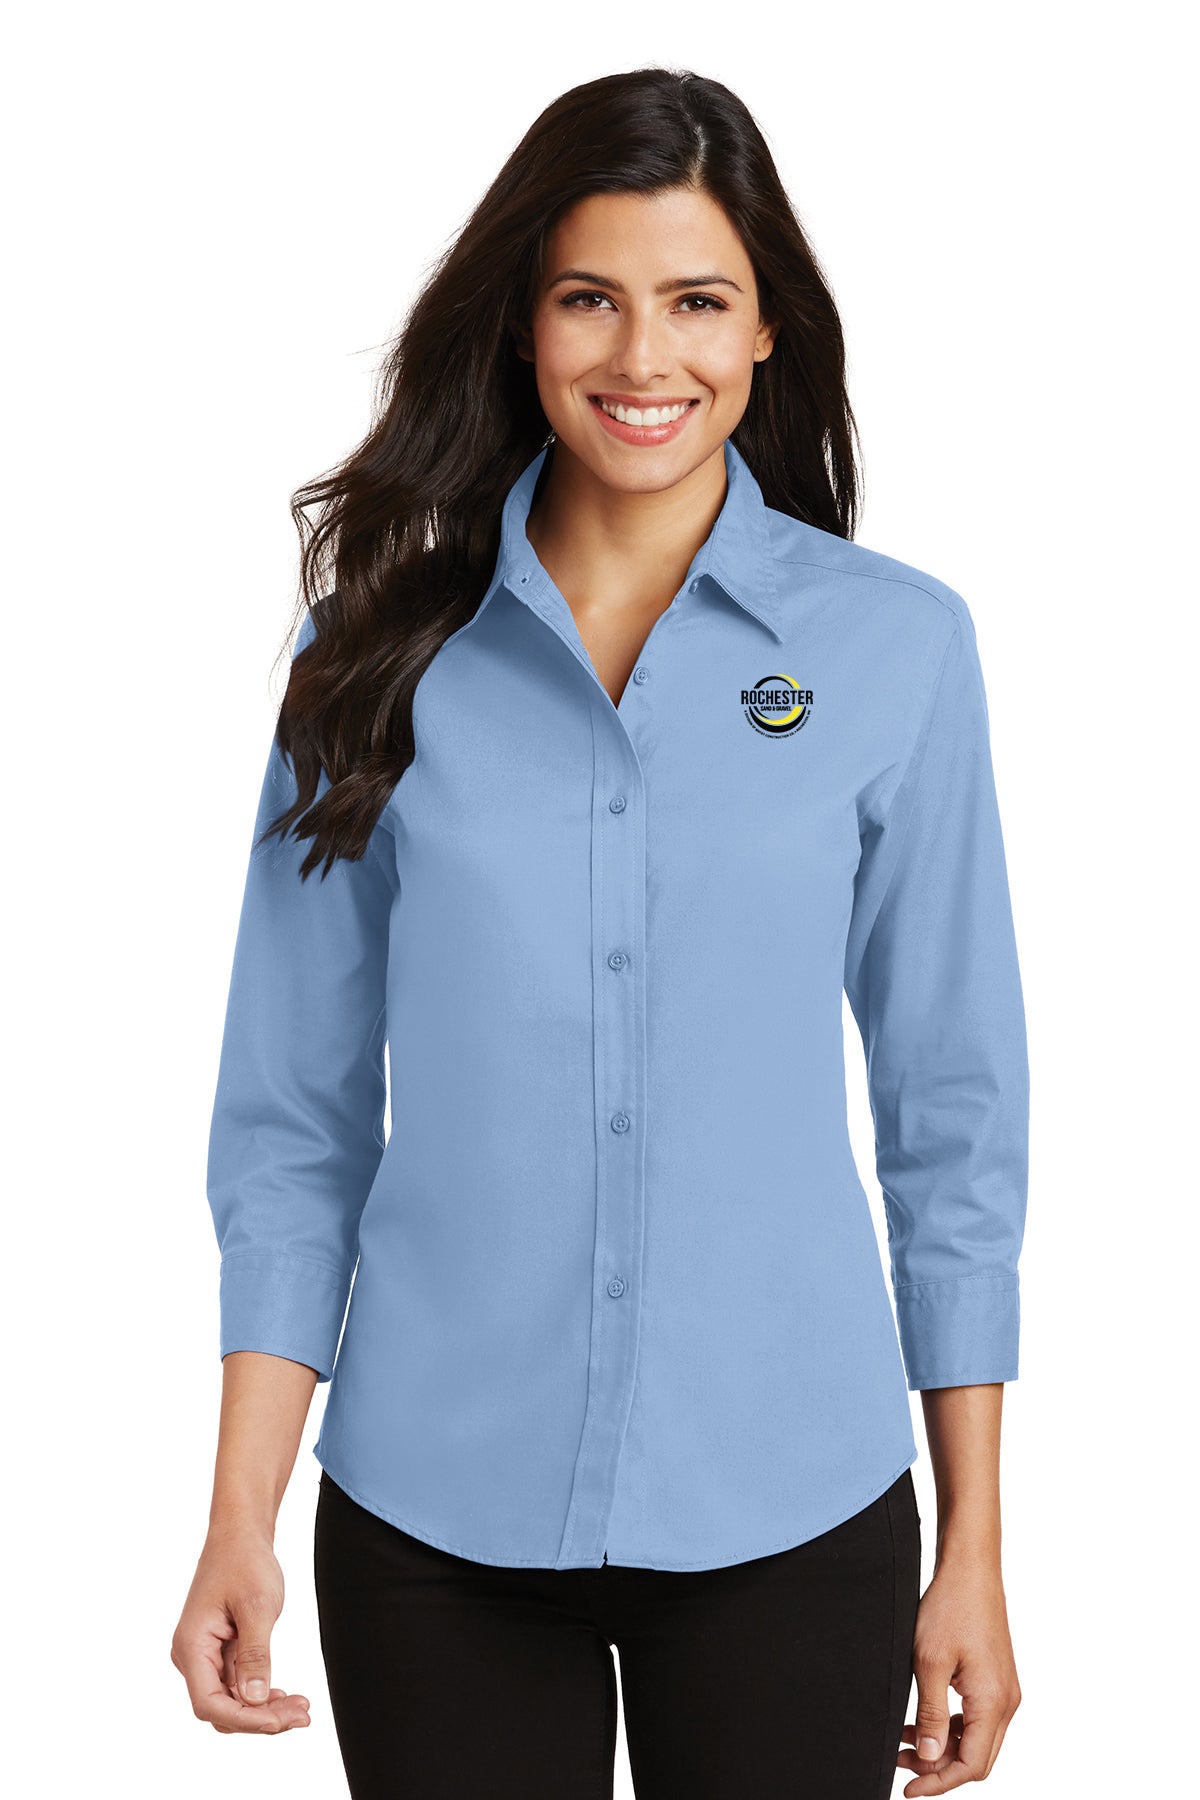 Rochester Sand and Gravel Ladies Button Up Shirt